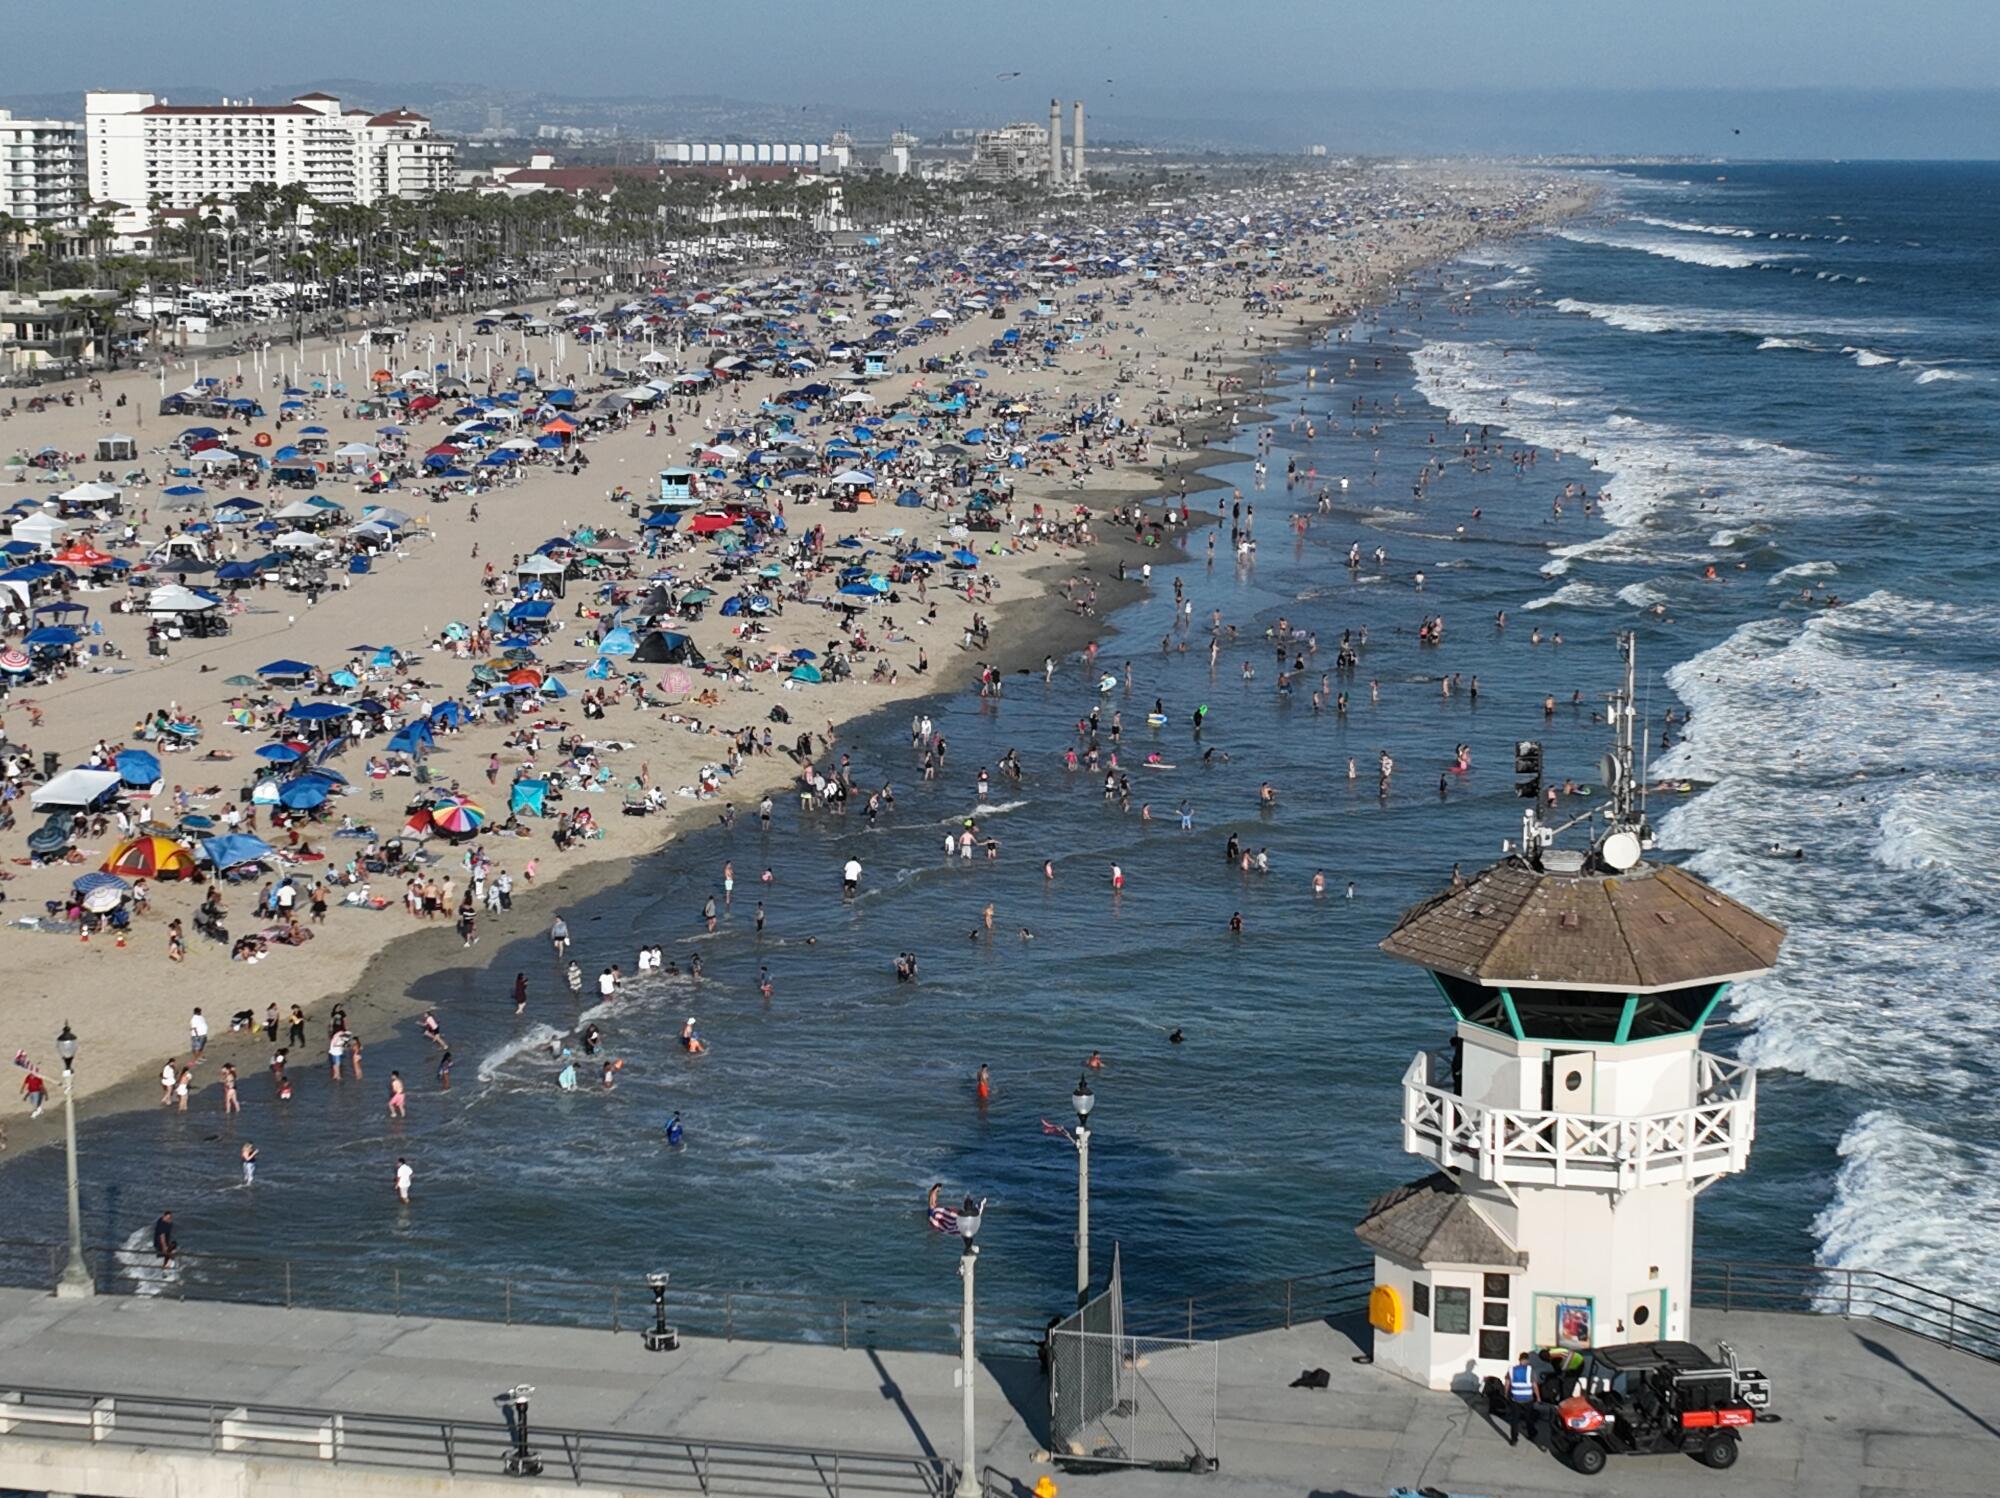 Thousands of beachgoers packed the shoreline to celebrating Independence Day in Huntington Beach.